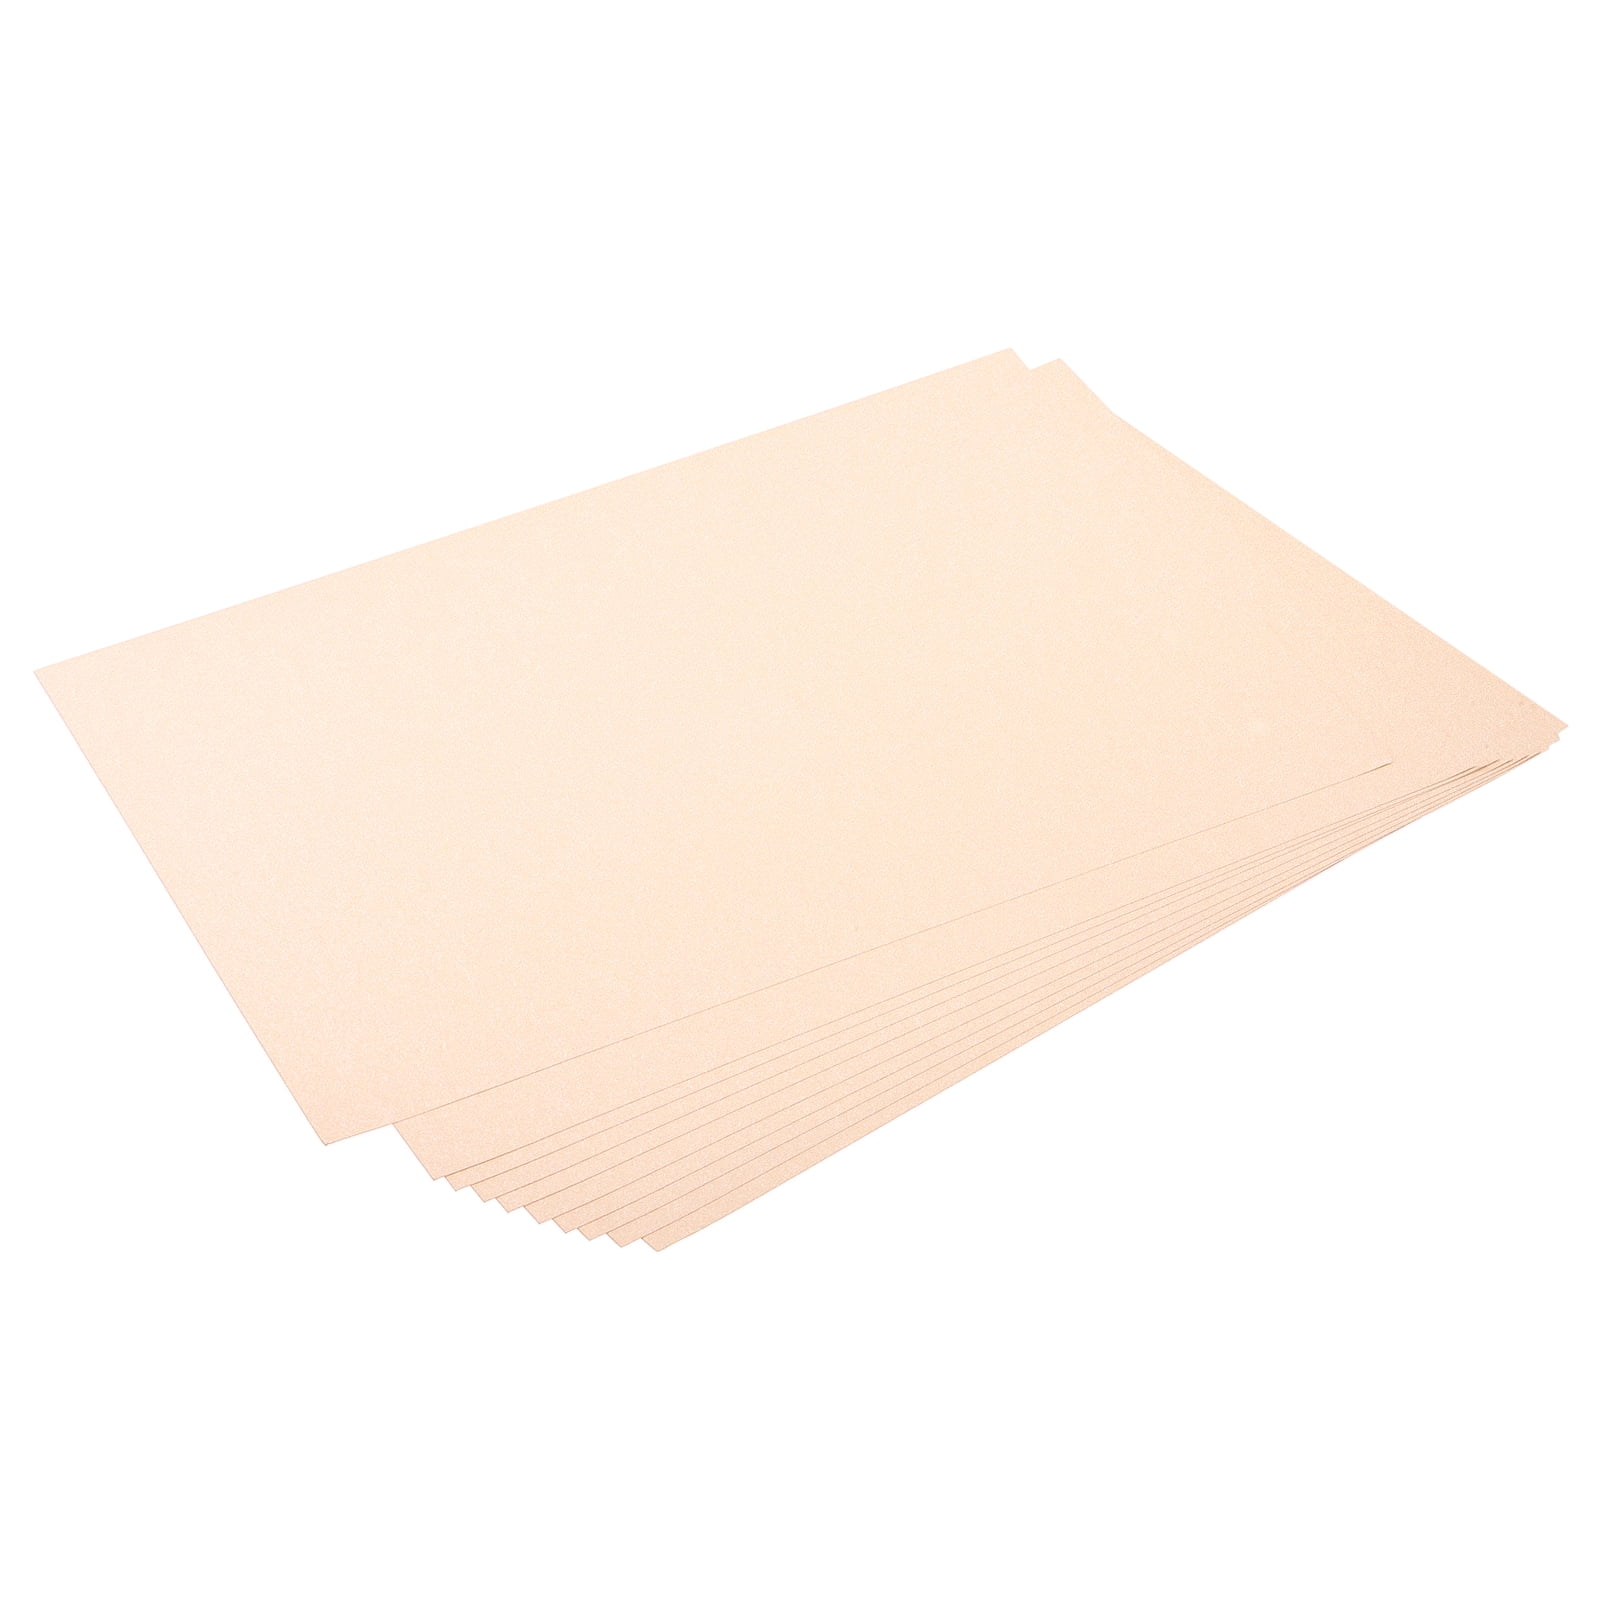 200Pcs Pearlescent Card Stock Assorted Colors Blank Metallic Cardstock  Paper with Rounded Corners 5.9x3.9in